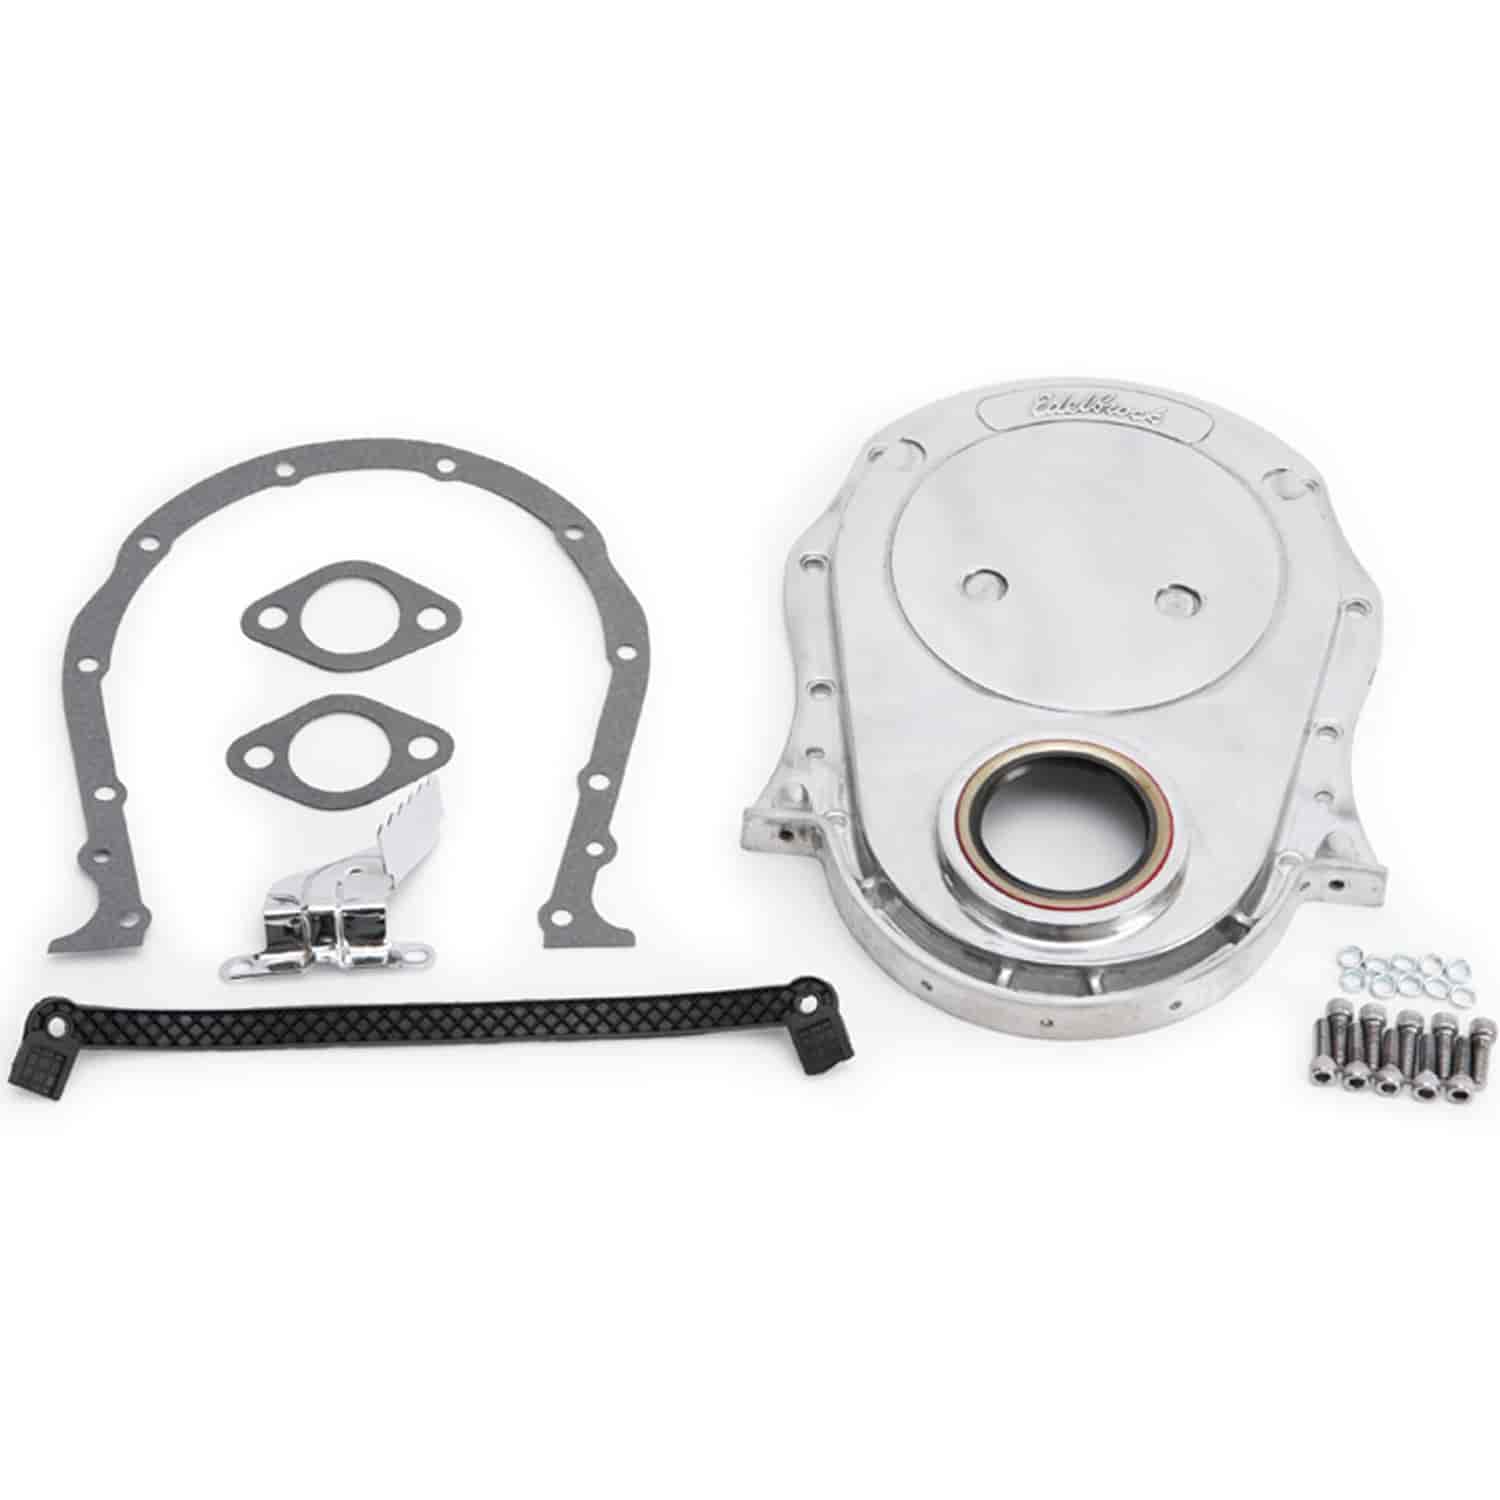 Aluminum Timing Cover for 1966-1990 Big Block Chevy